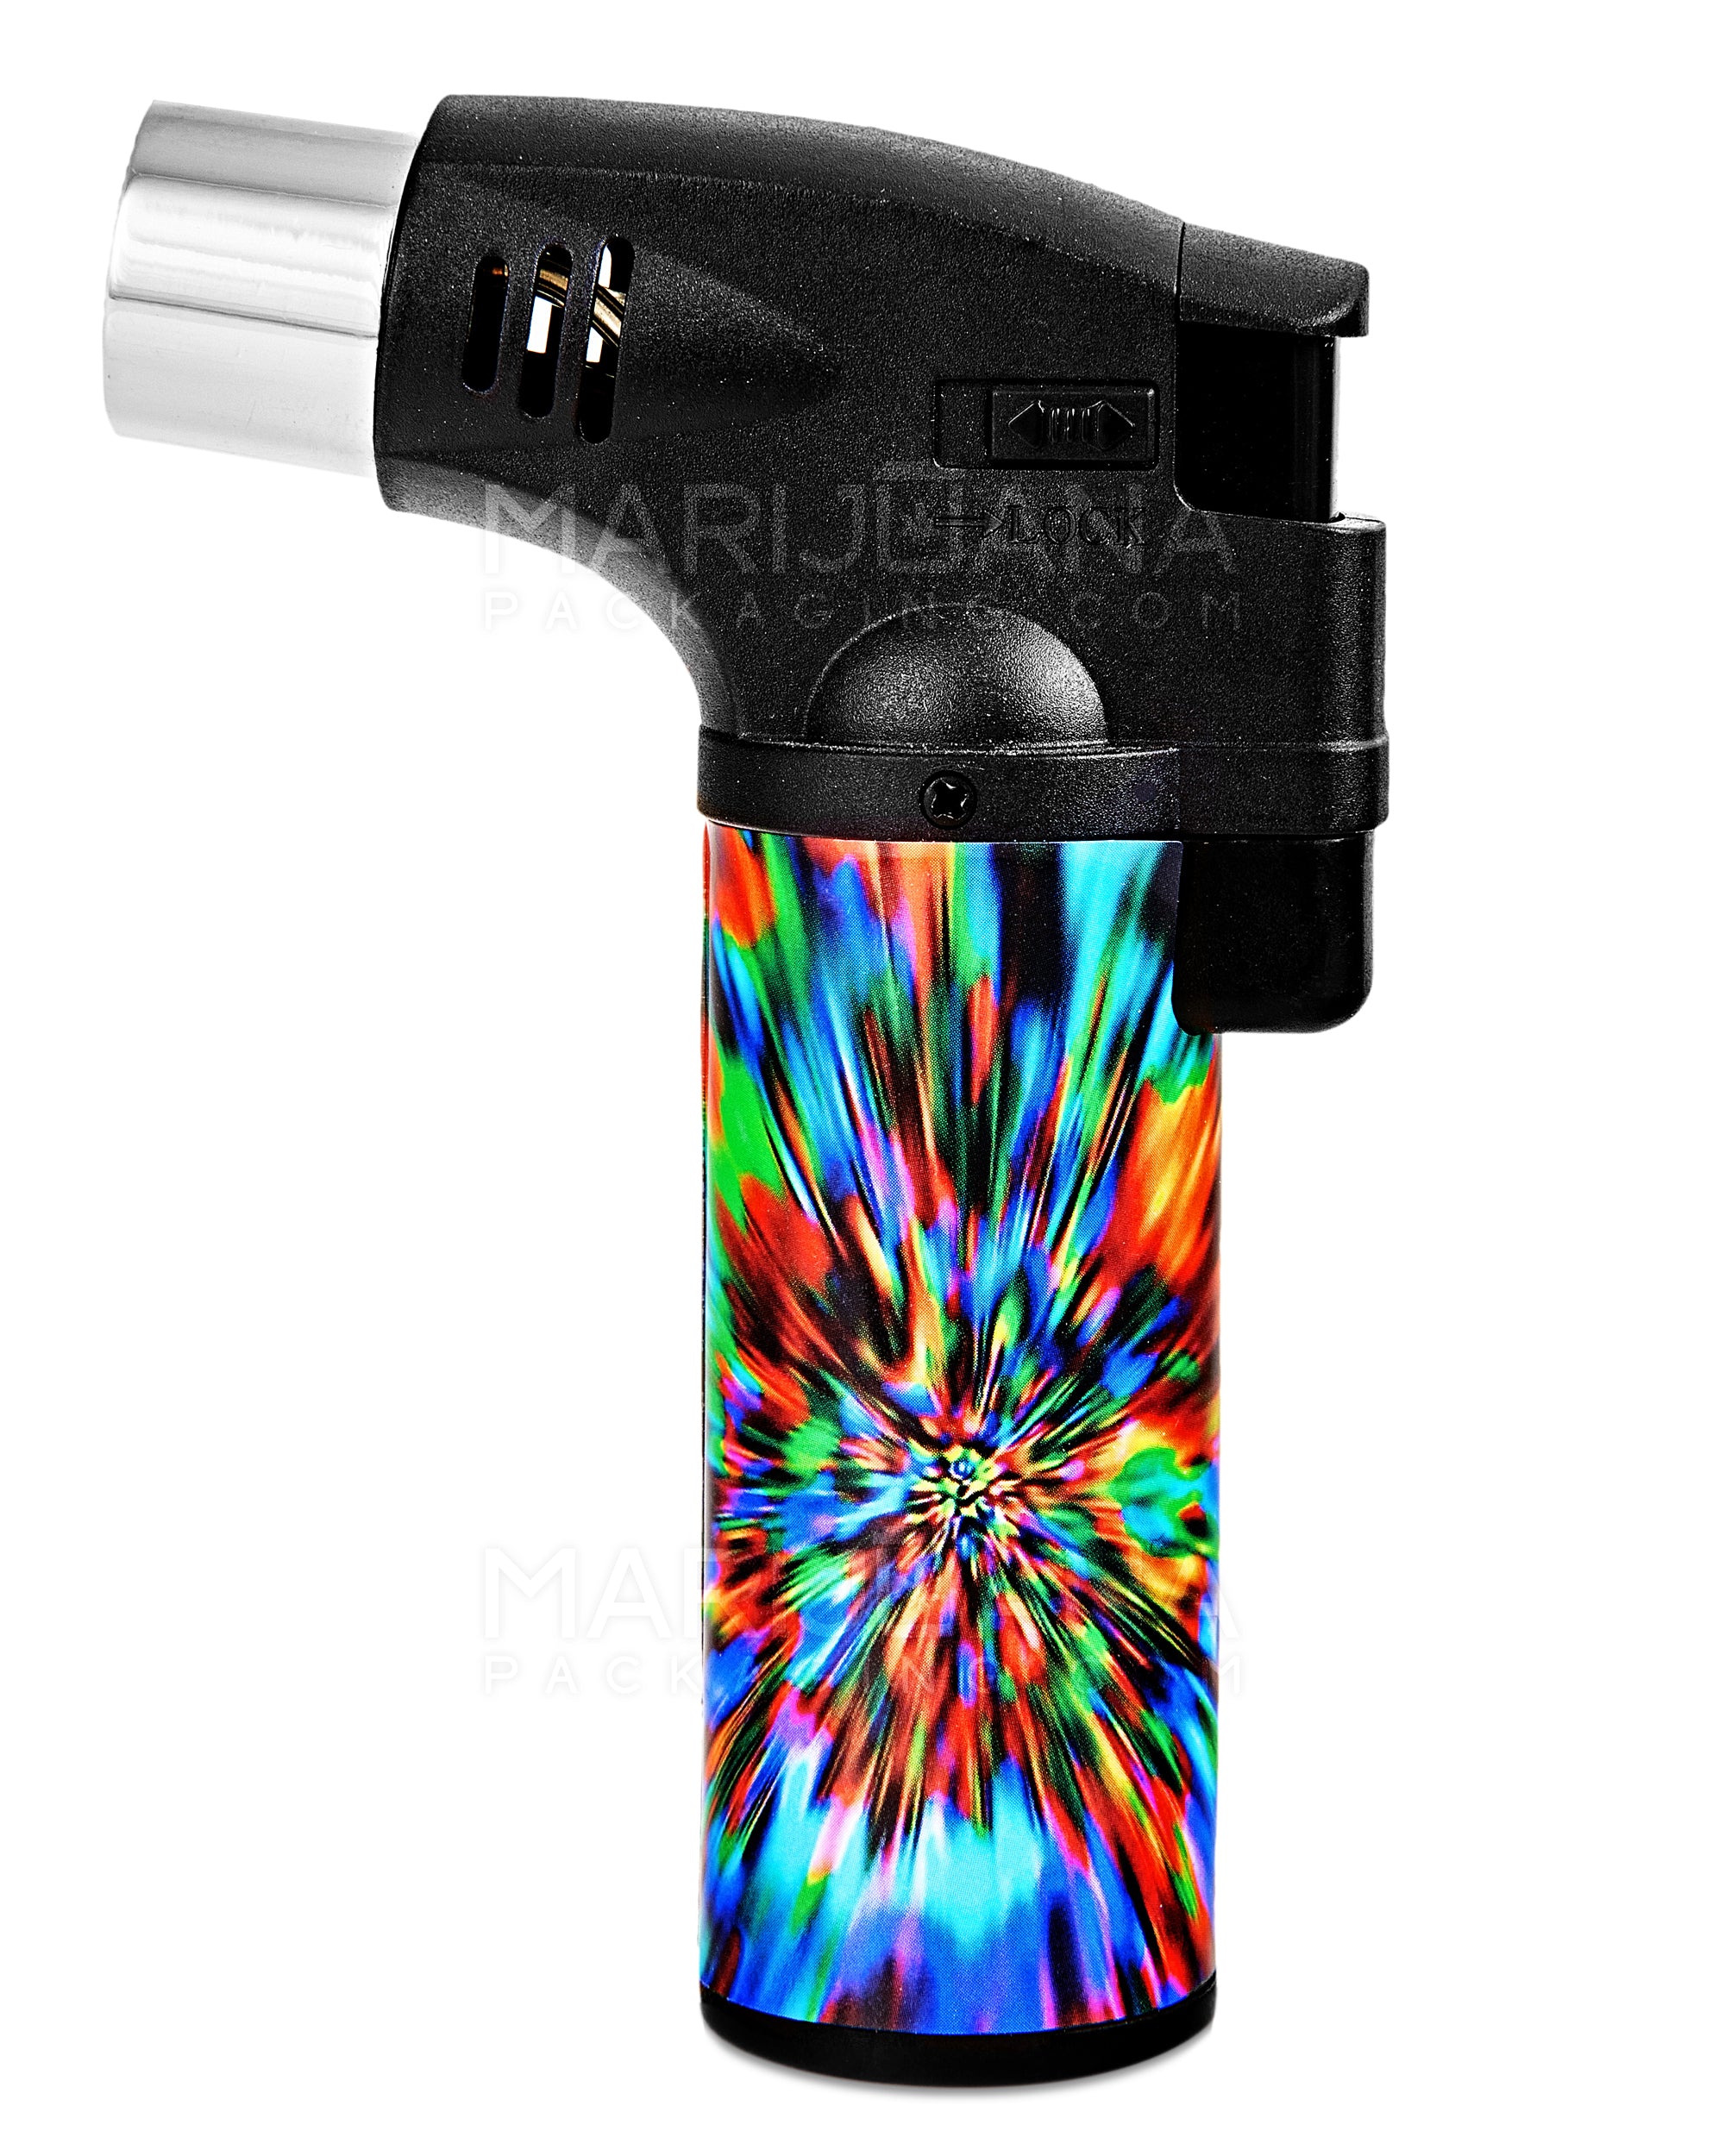 Psychedelic Design Plastic Torch w/ Safety Lock | 4.5in Tall - Butane - Assorted - 5